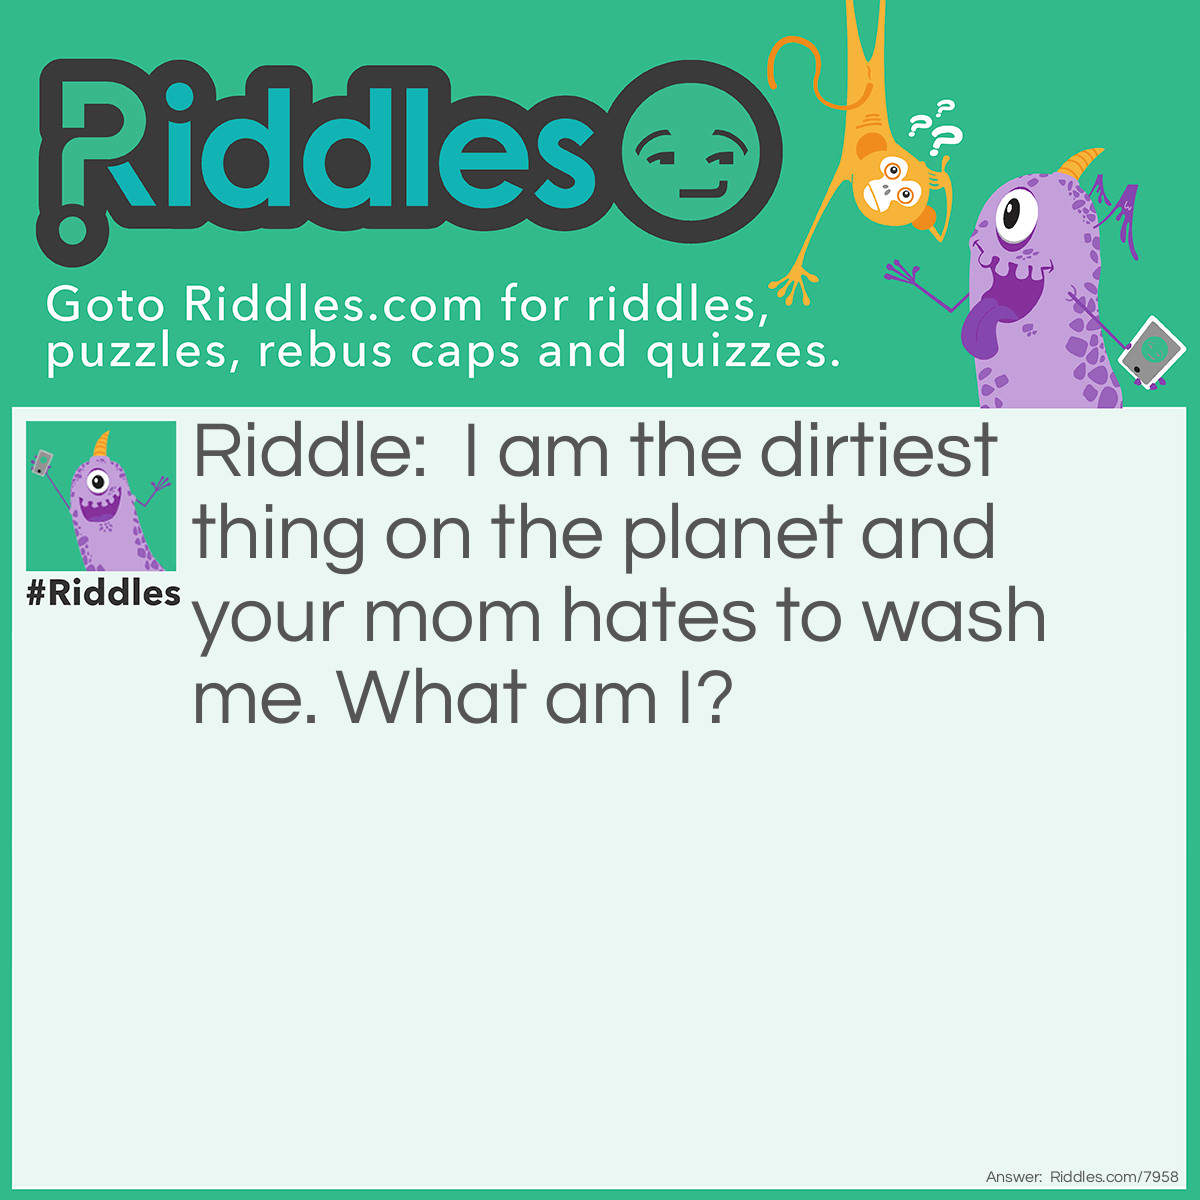 Riddle: I am the dirtiest thing on the planet and your mom hates to wash me. What am I? Answer: Underwear!